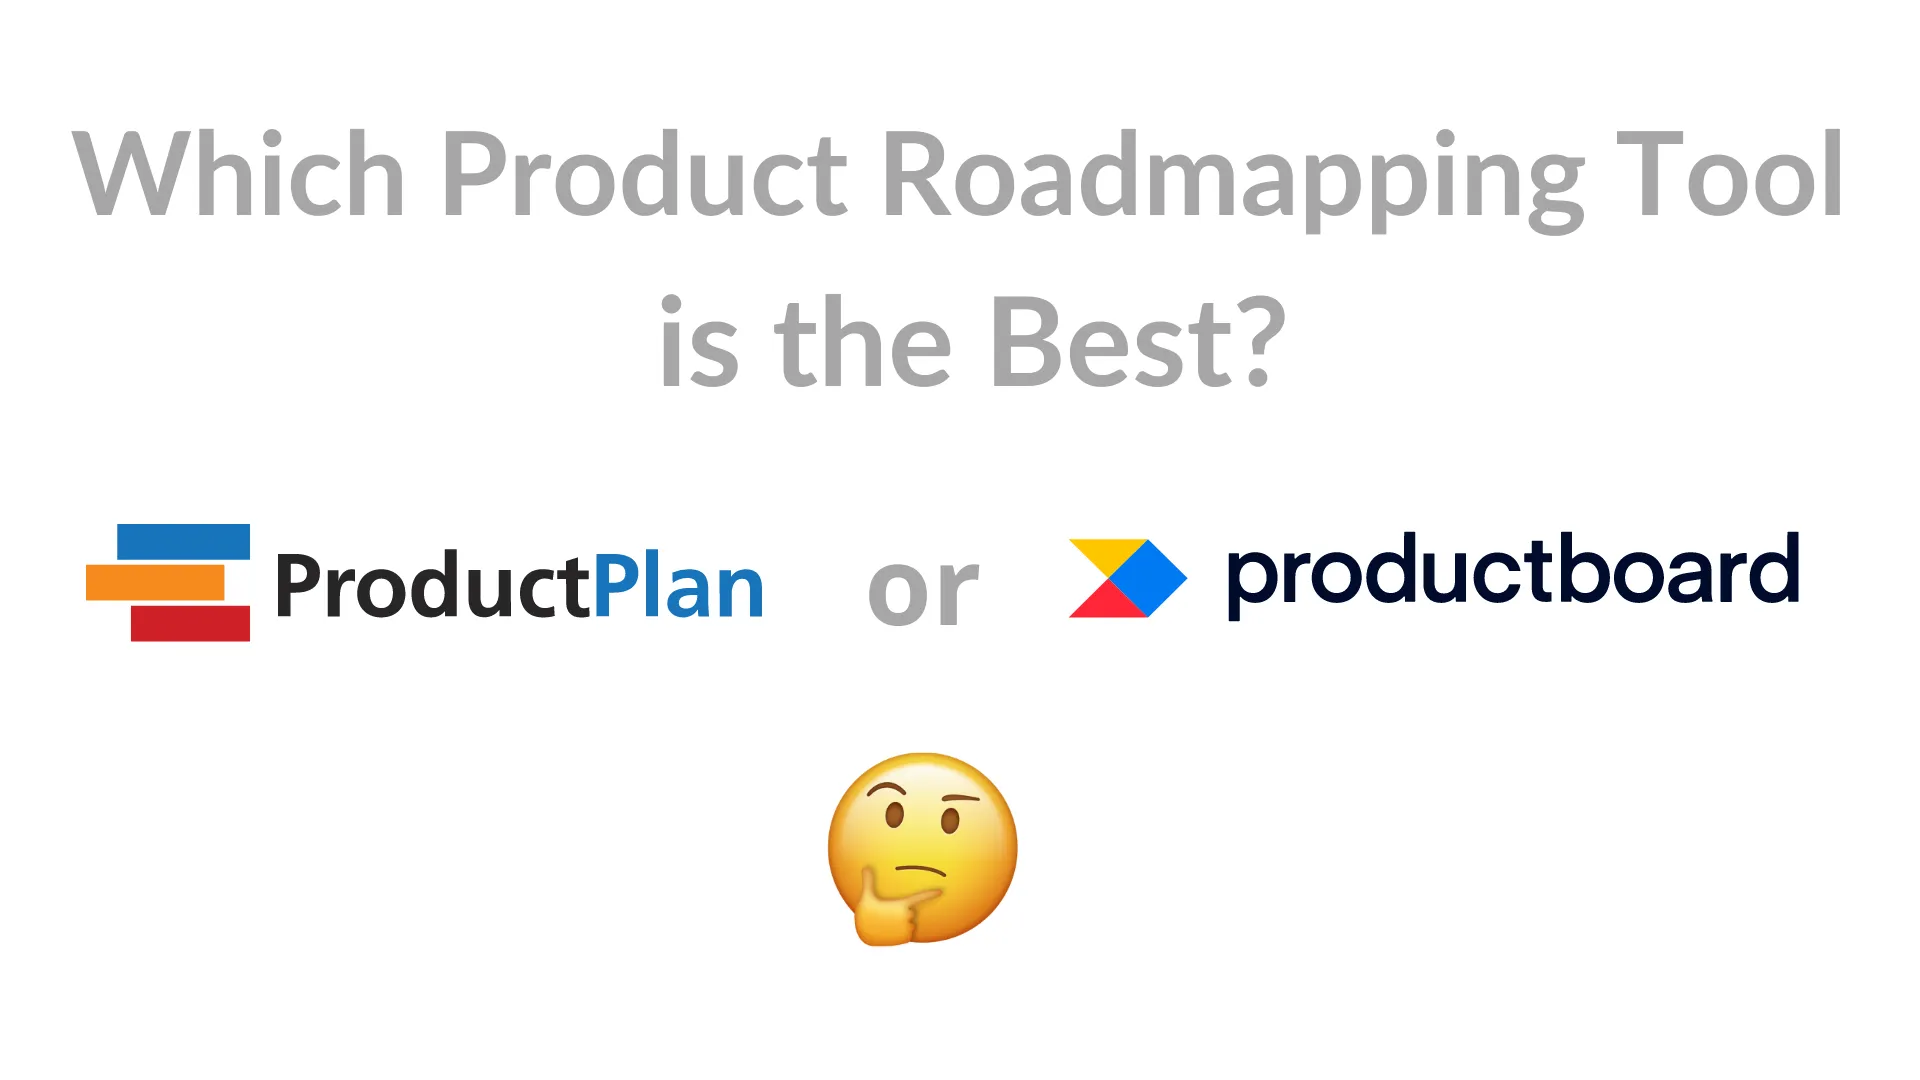 productboard vs productplan image